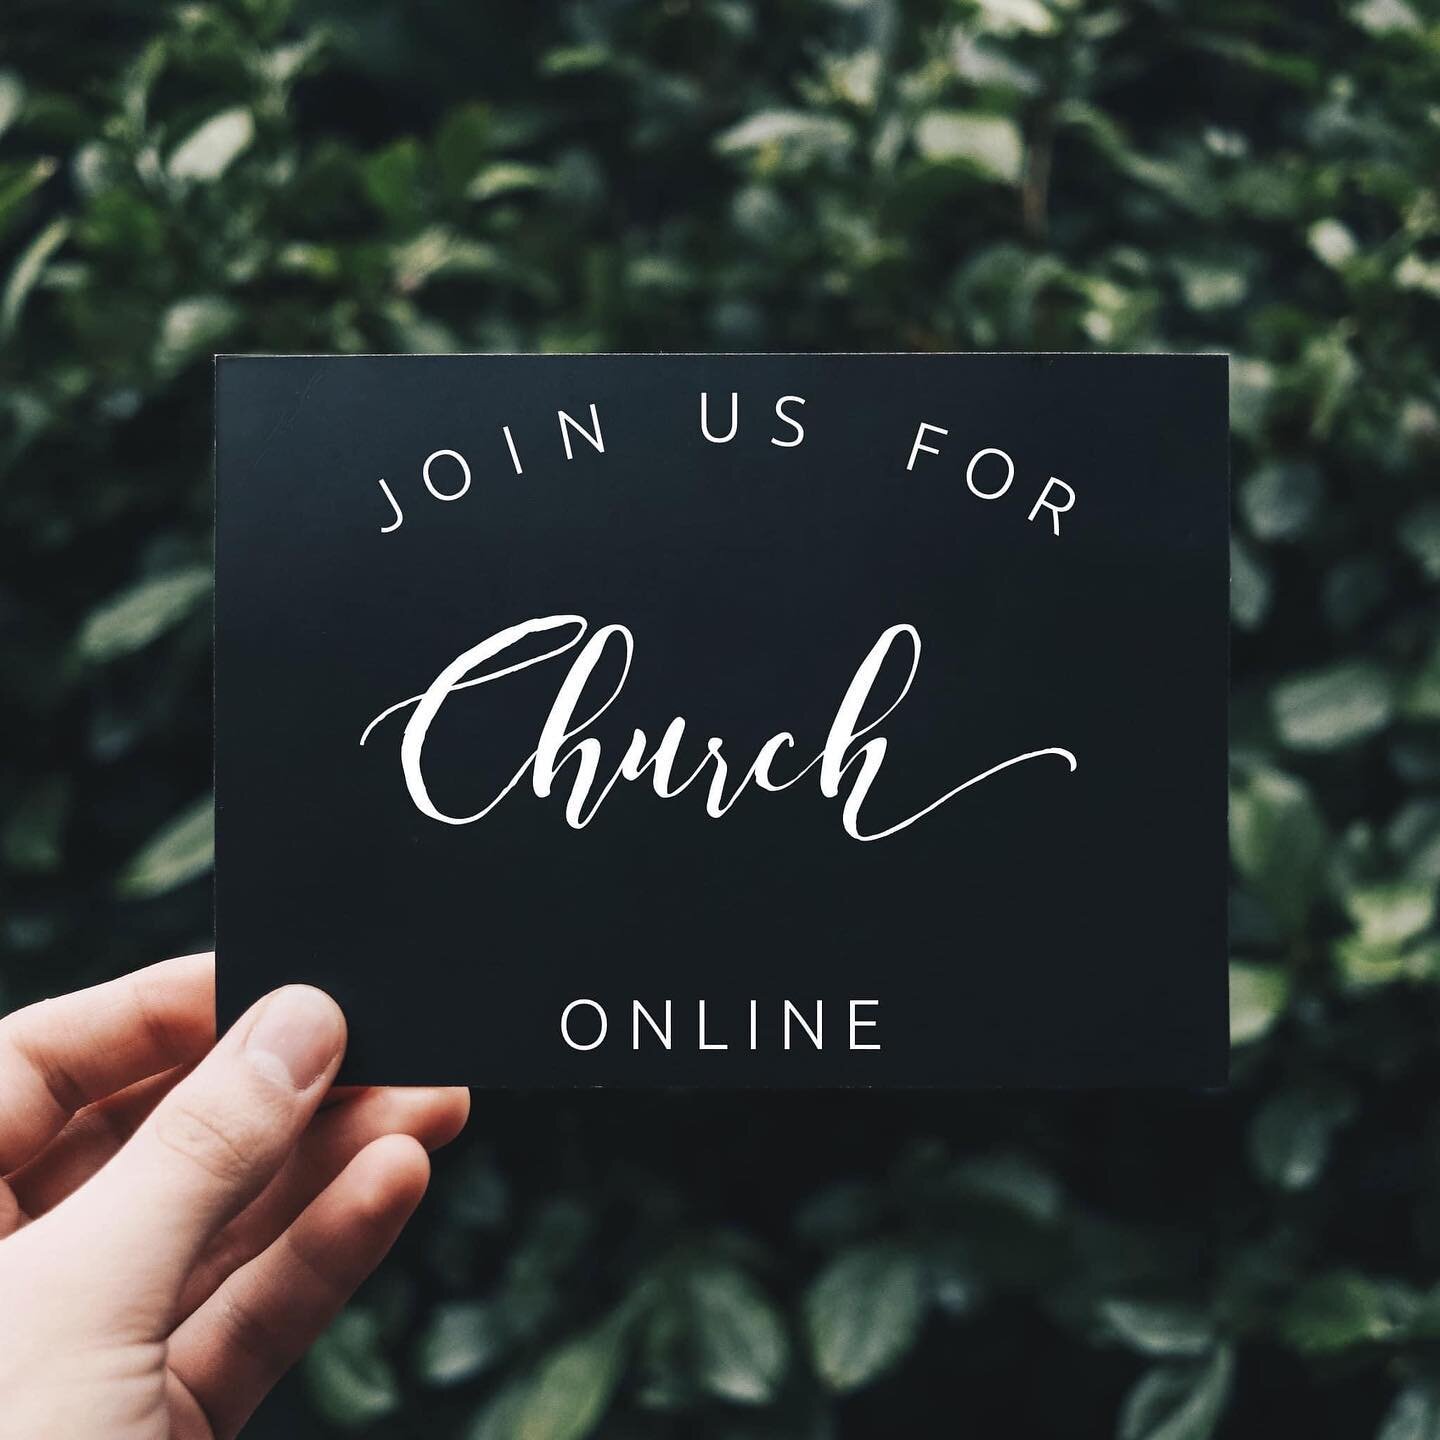 Hello Church, 

Due to the water outage in our area, we will not be having in-person service this Sunday. Join us for online church at 10:30am.